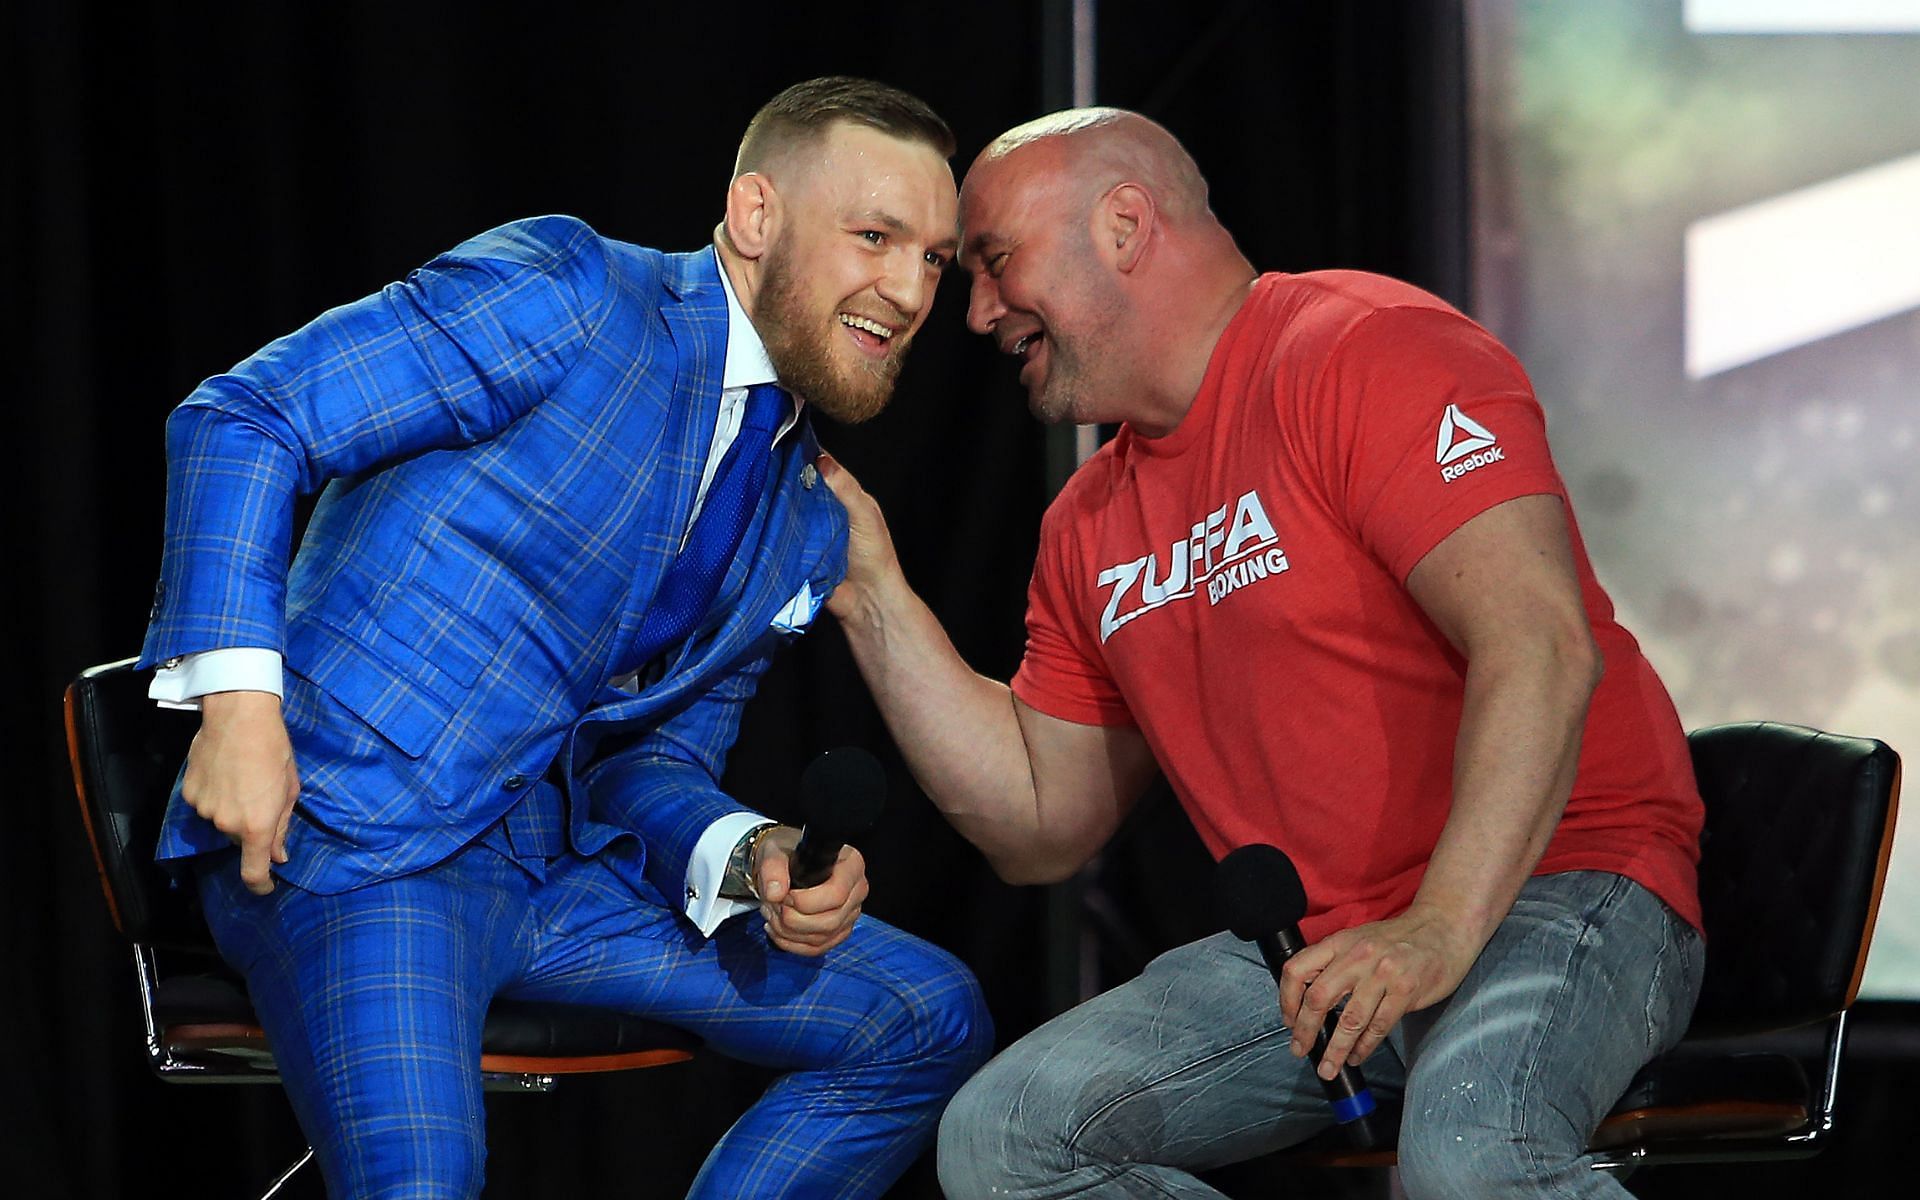 Conor McGregor (left) speaks with Dana White (right) during the Floyd Mayweather Jr. vs. McGregor World Press Tour